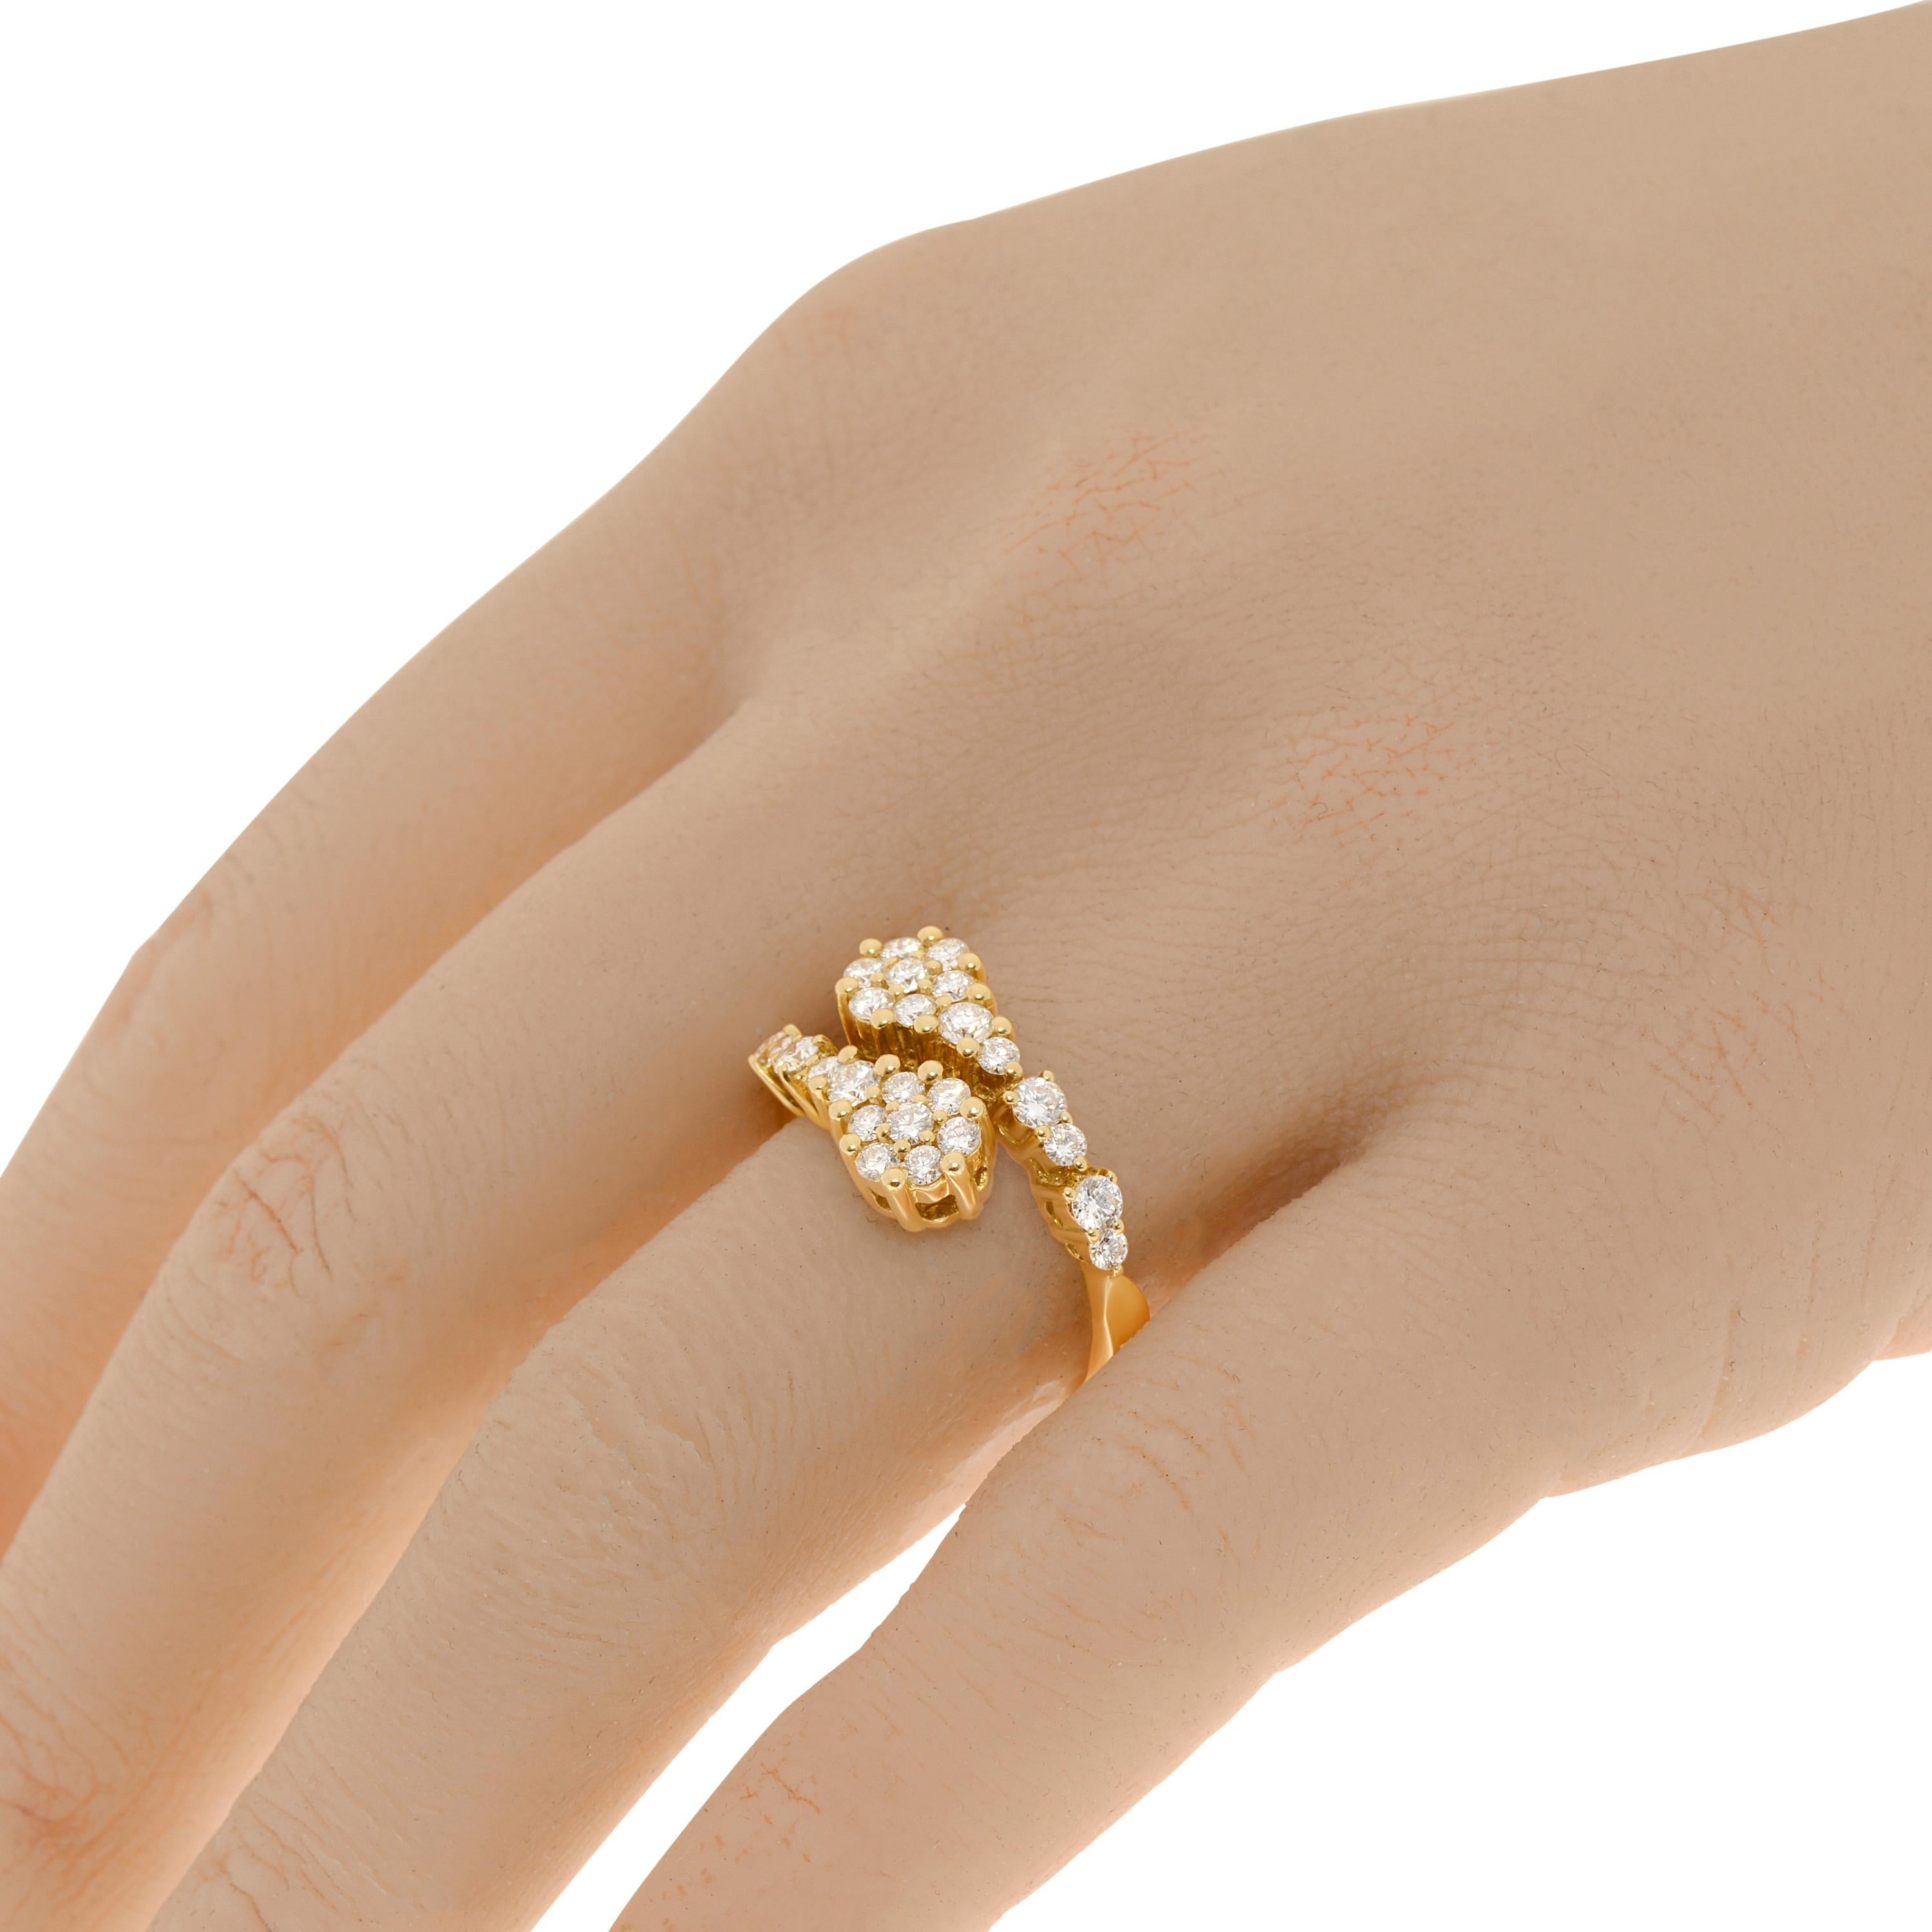 Zydo 18K Yellow Gold Contrarier Ring features 1.02ct. diamonds. The ring size is 7.5 (55.7). The decoration size is 1/2